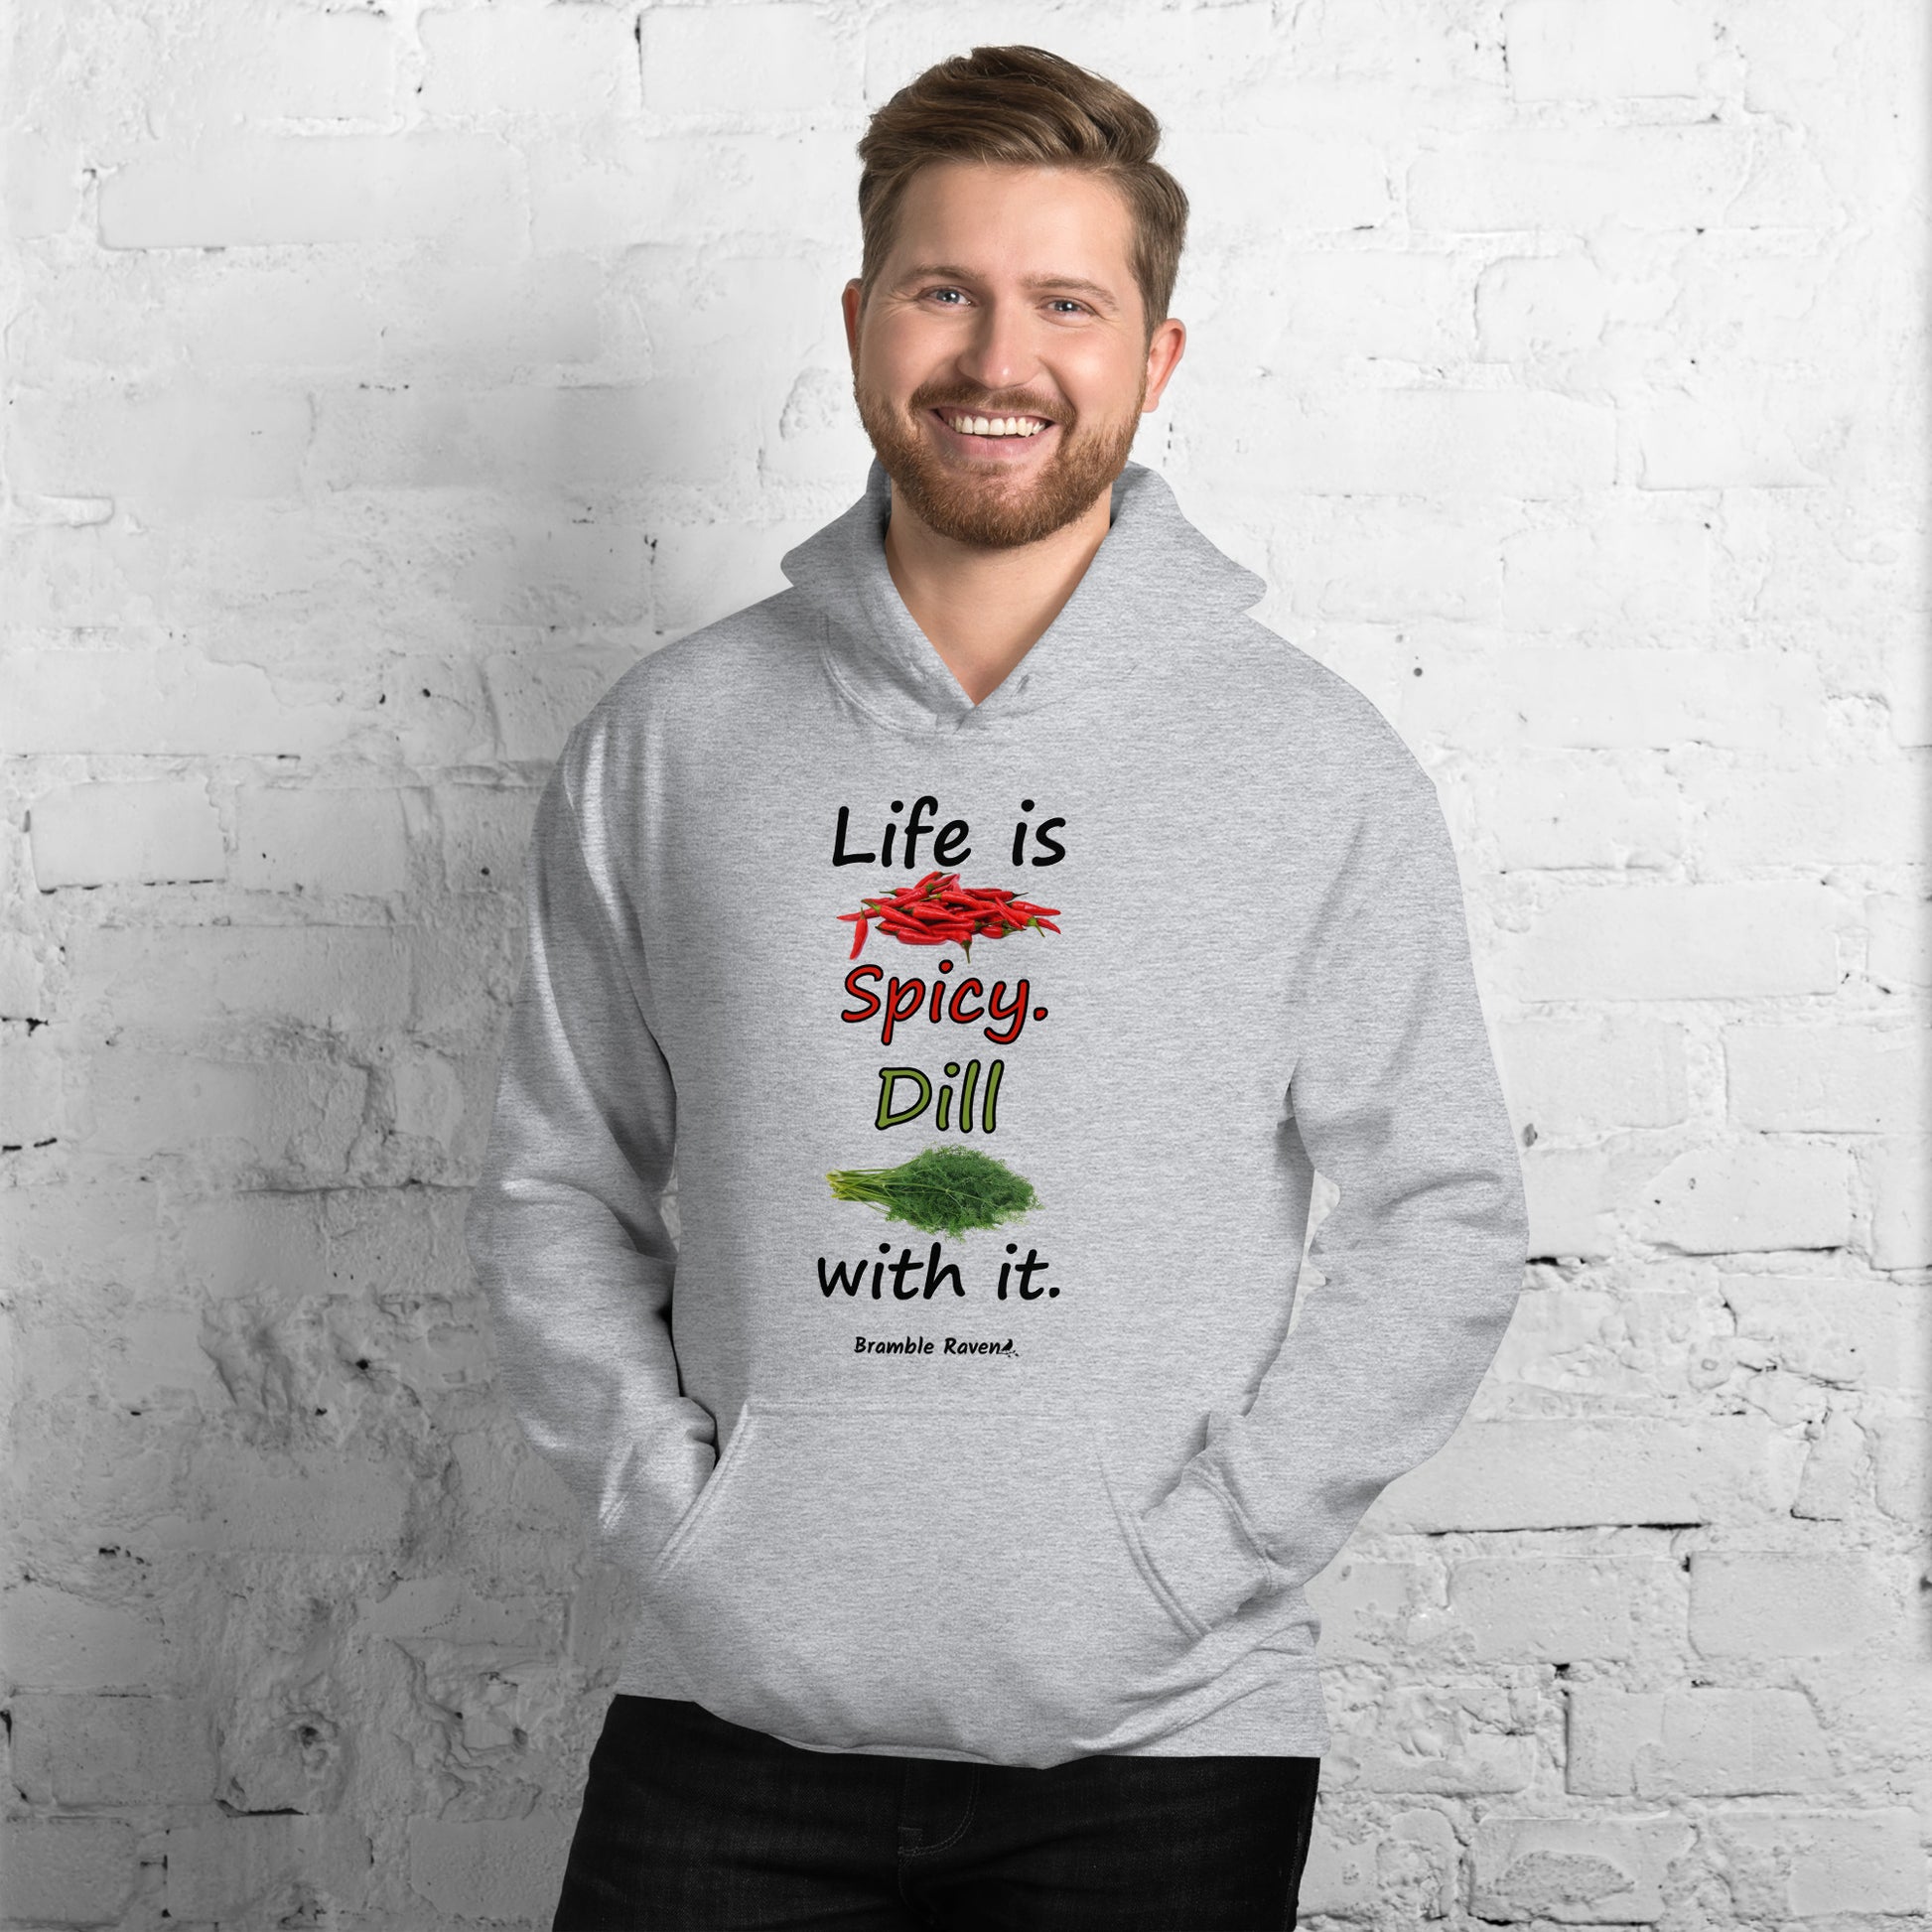 Sport grey colored unisex heavy blend hoodie.  Double lined hood, matching drawcord, front pouch pocket. Rib knit cuffs and waistband. Features text and image: Life is spicy. Dill with it.  Shown on male model against brick wall.